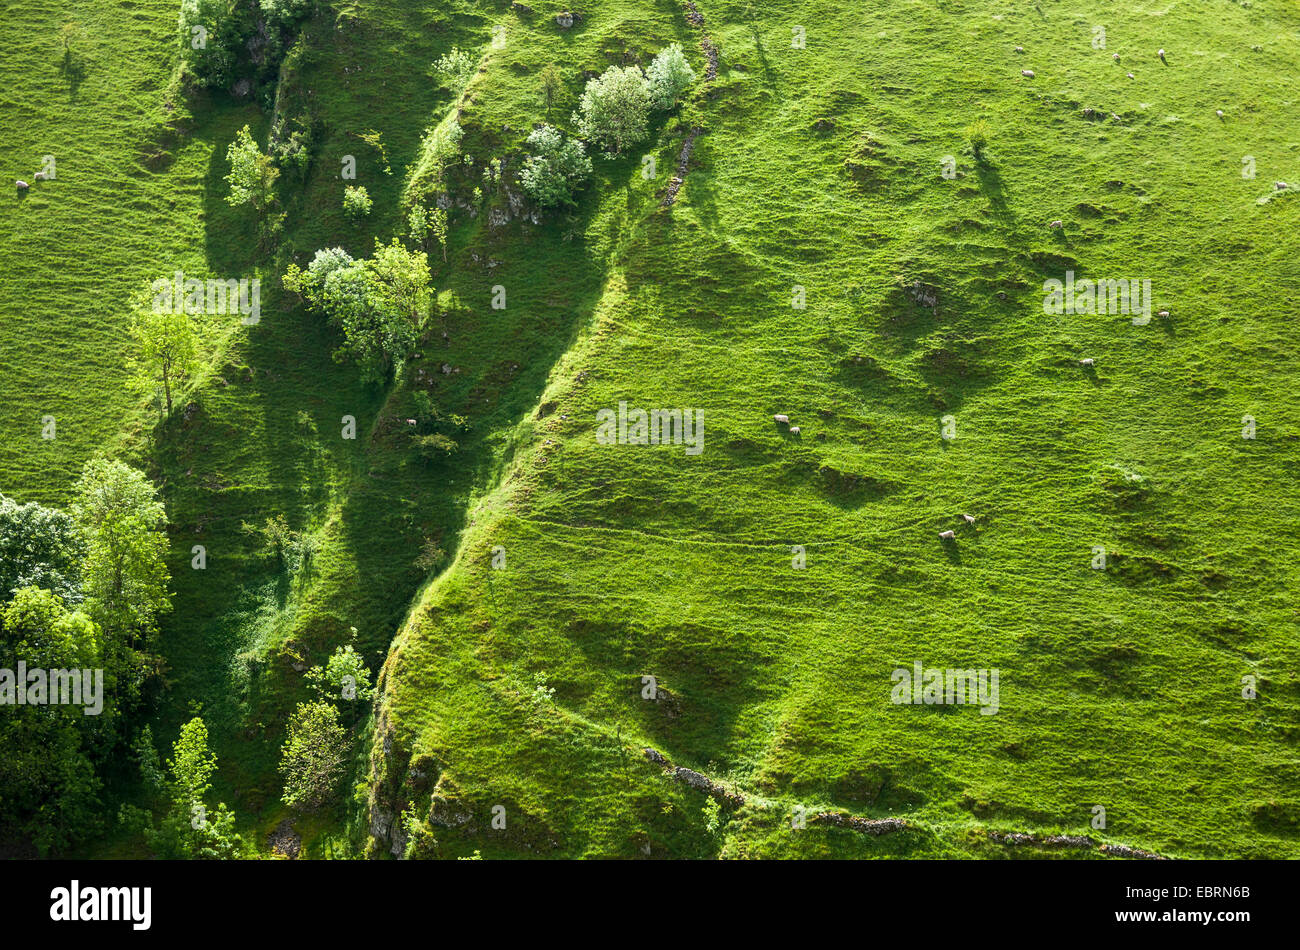 Sheep grazing on the steep slope of Wolfscote Dale in the Peak District. Summer greenery. Stock Photo